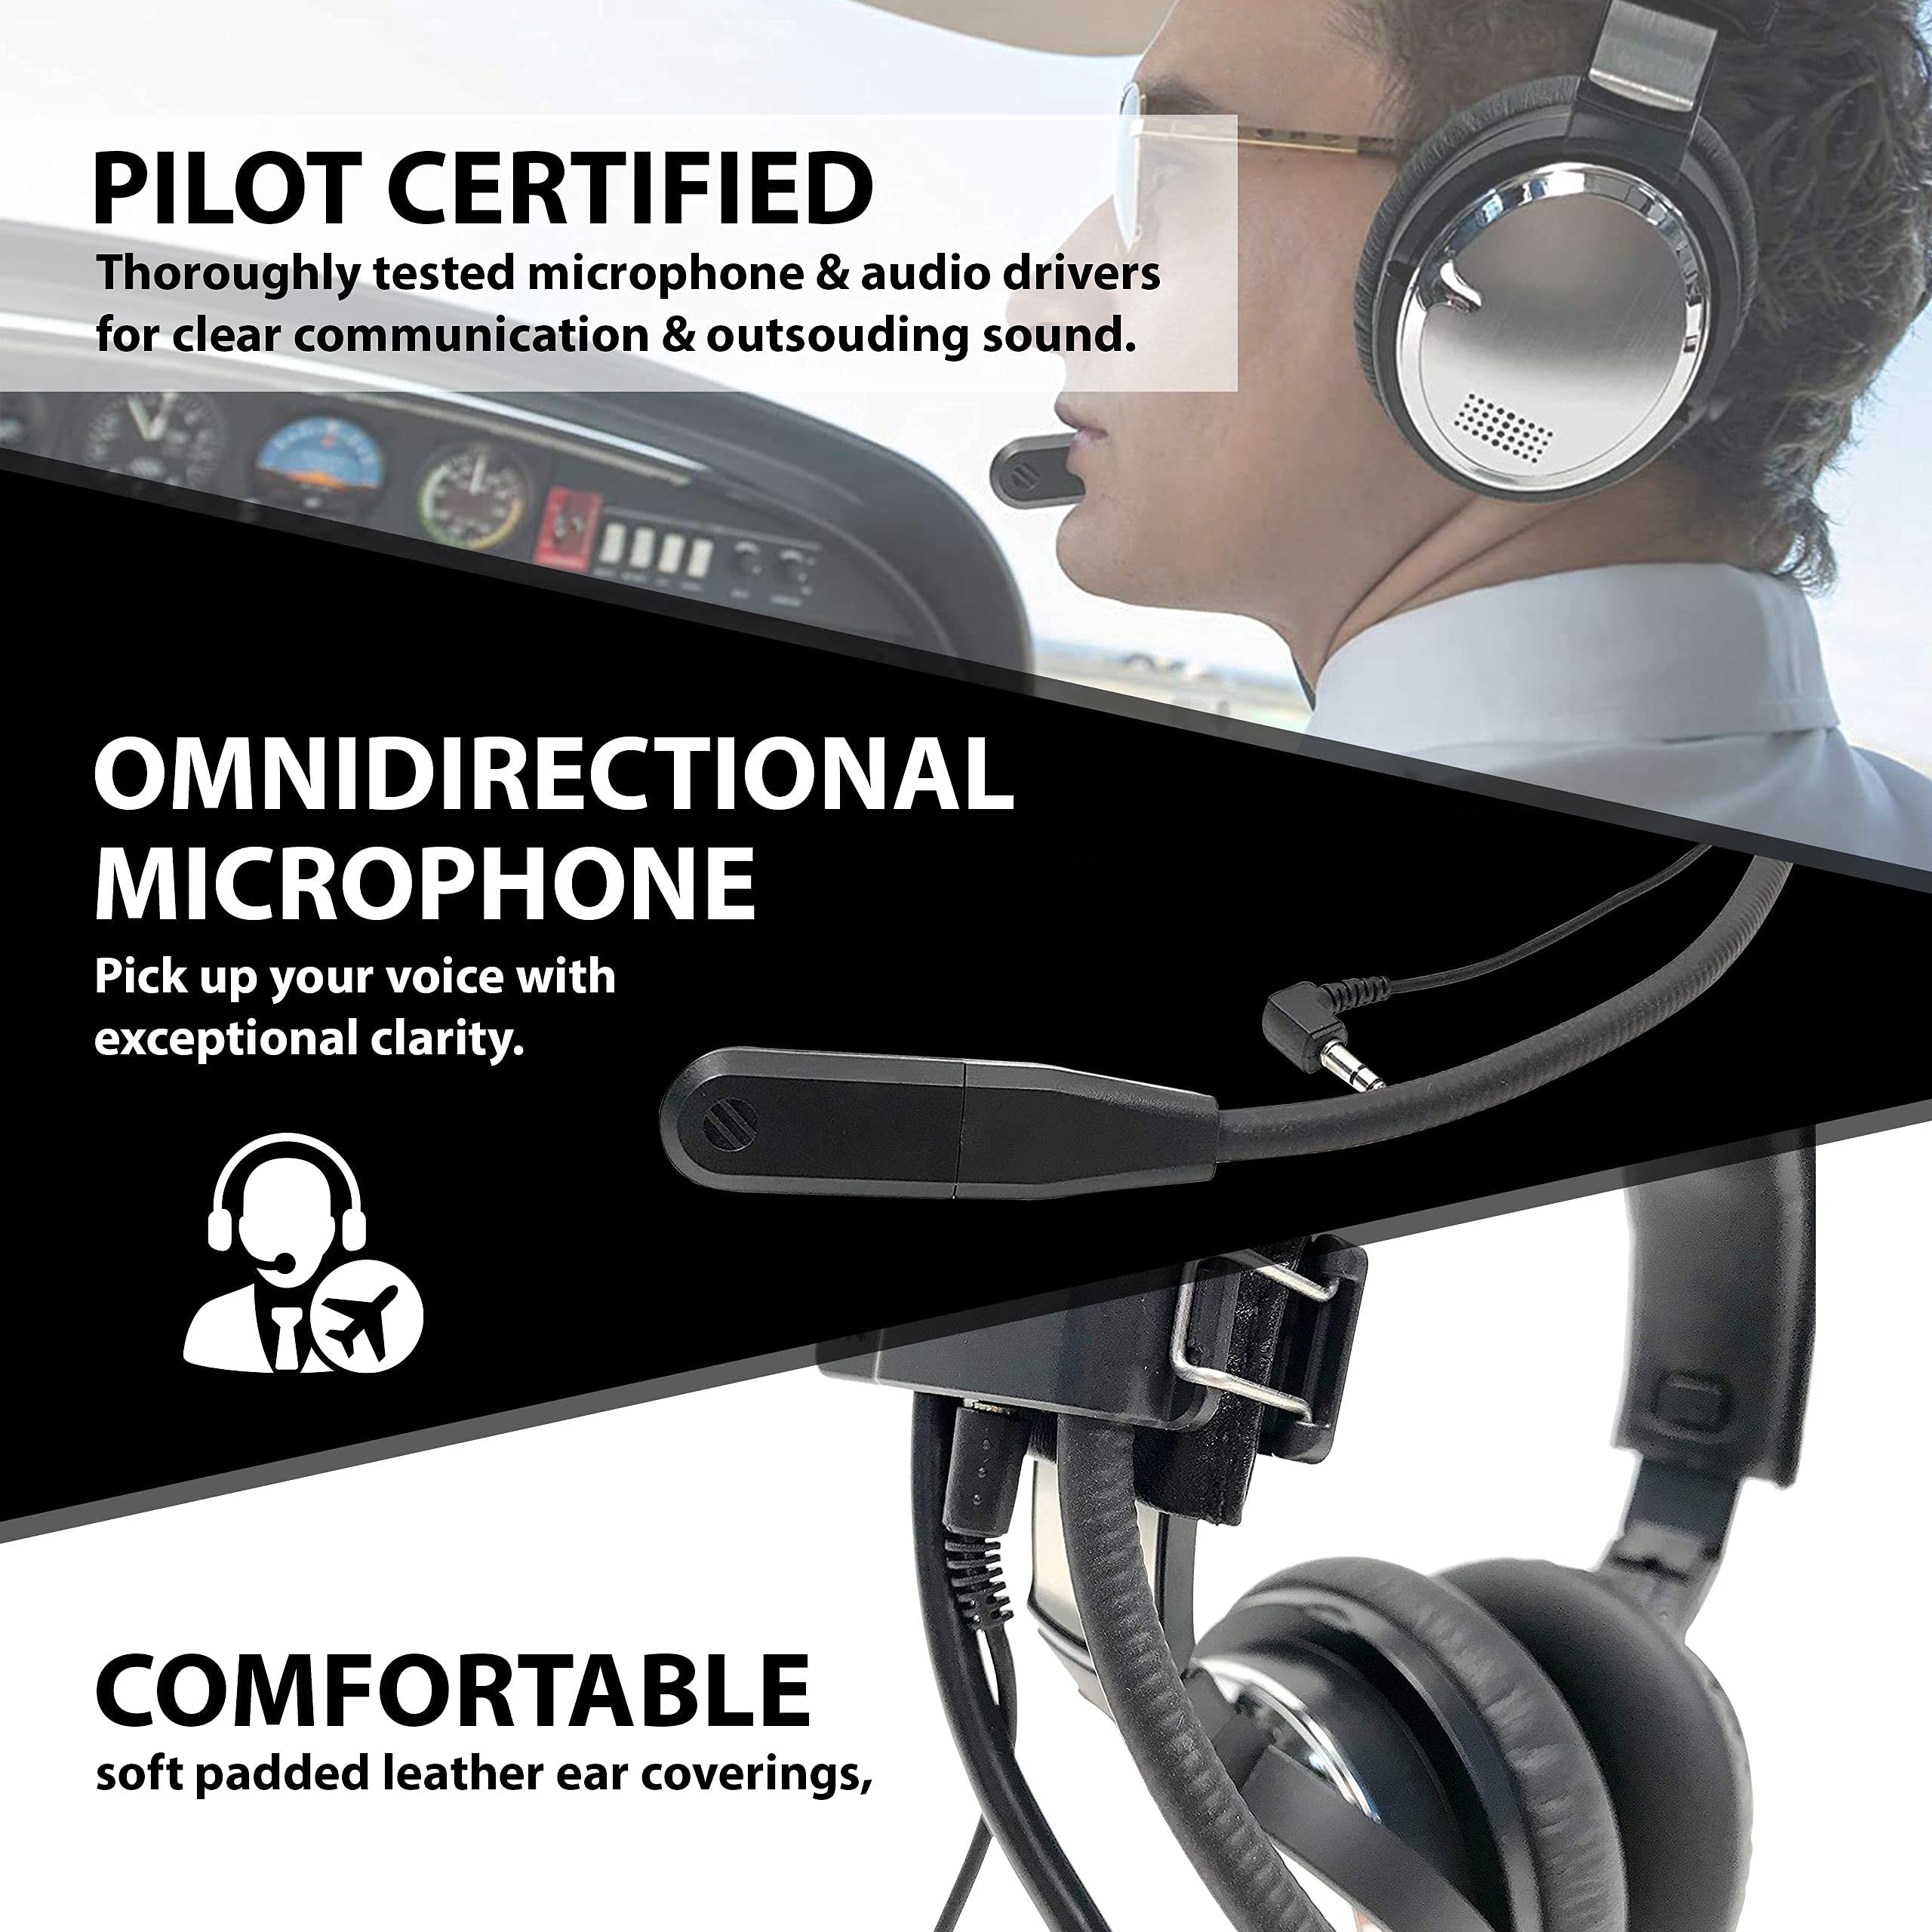 Earhart Pilot Aviation Headset for Airplanes, Helicopter - Active Noise Reduction - Wireless Bluetooth Avionics with Microphone - Professional or Student General Aviation Headphones